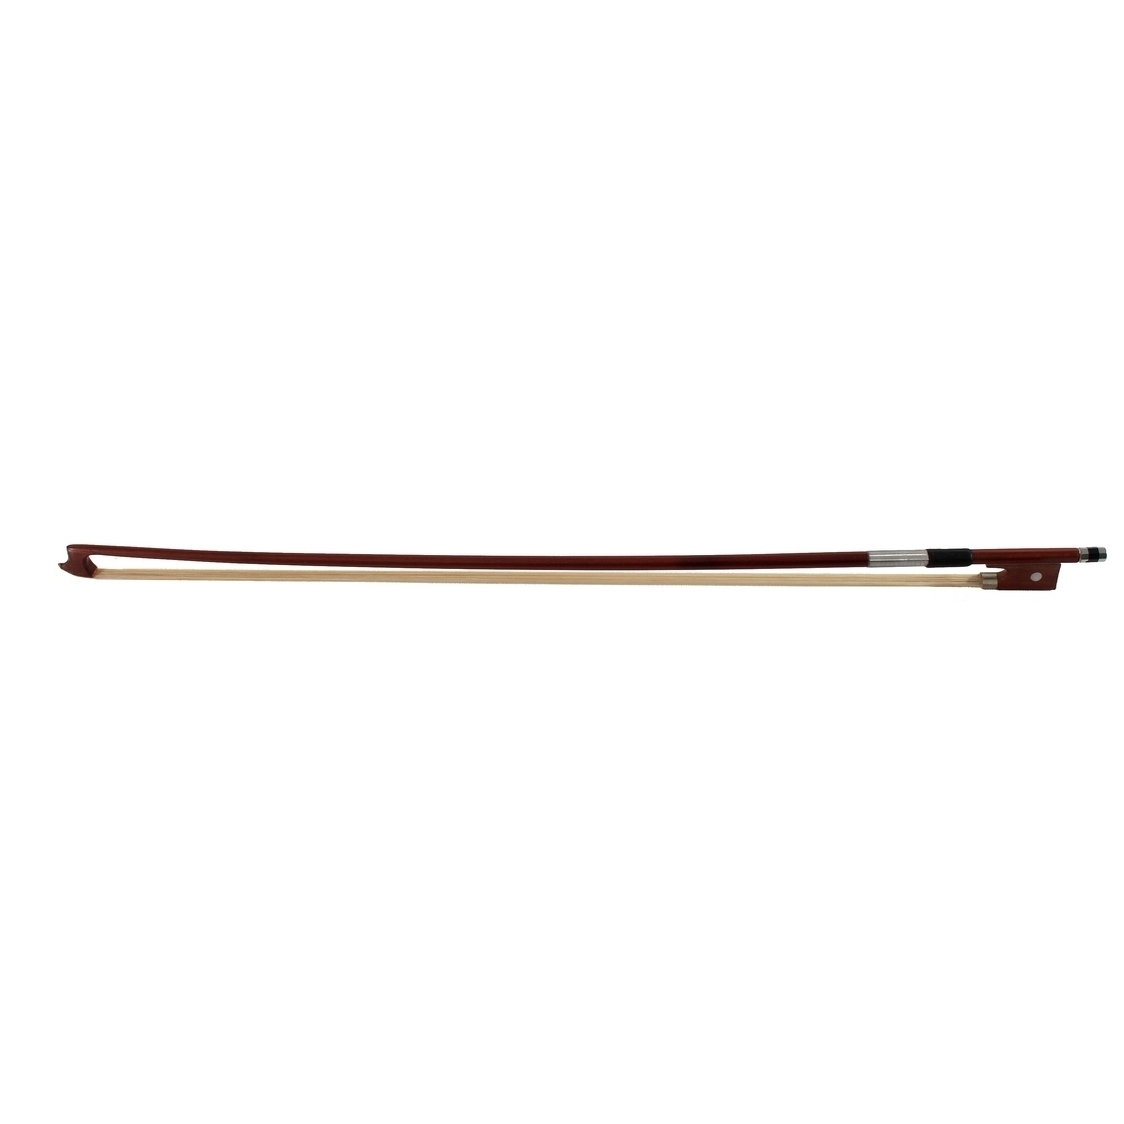 SOUNDSATION AT-10VC 4/4 Cello Bow